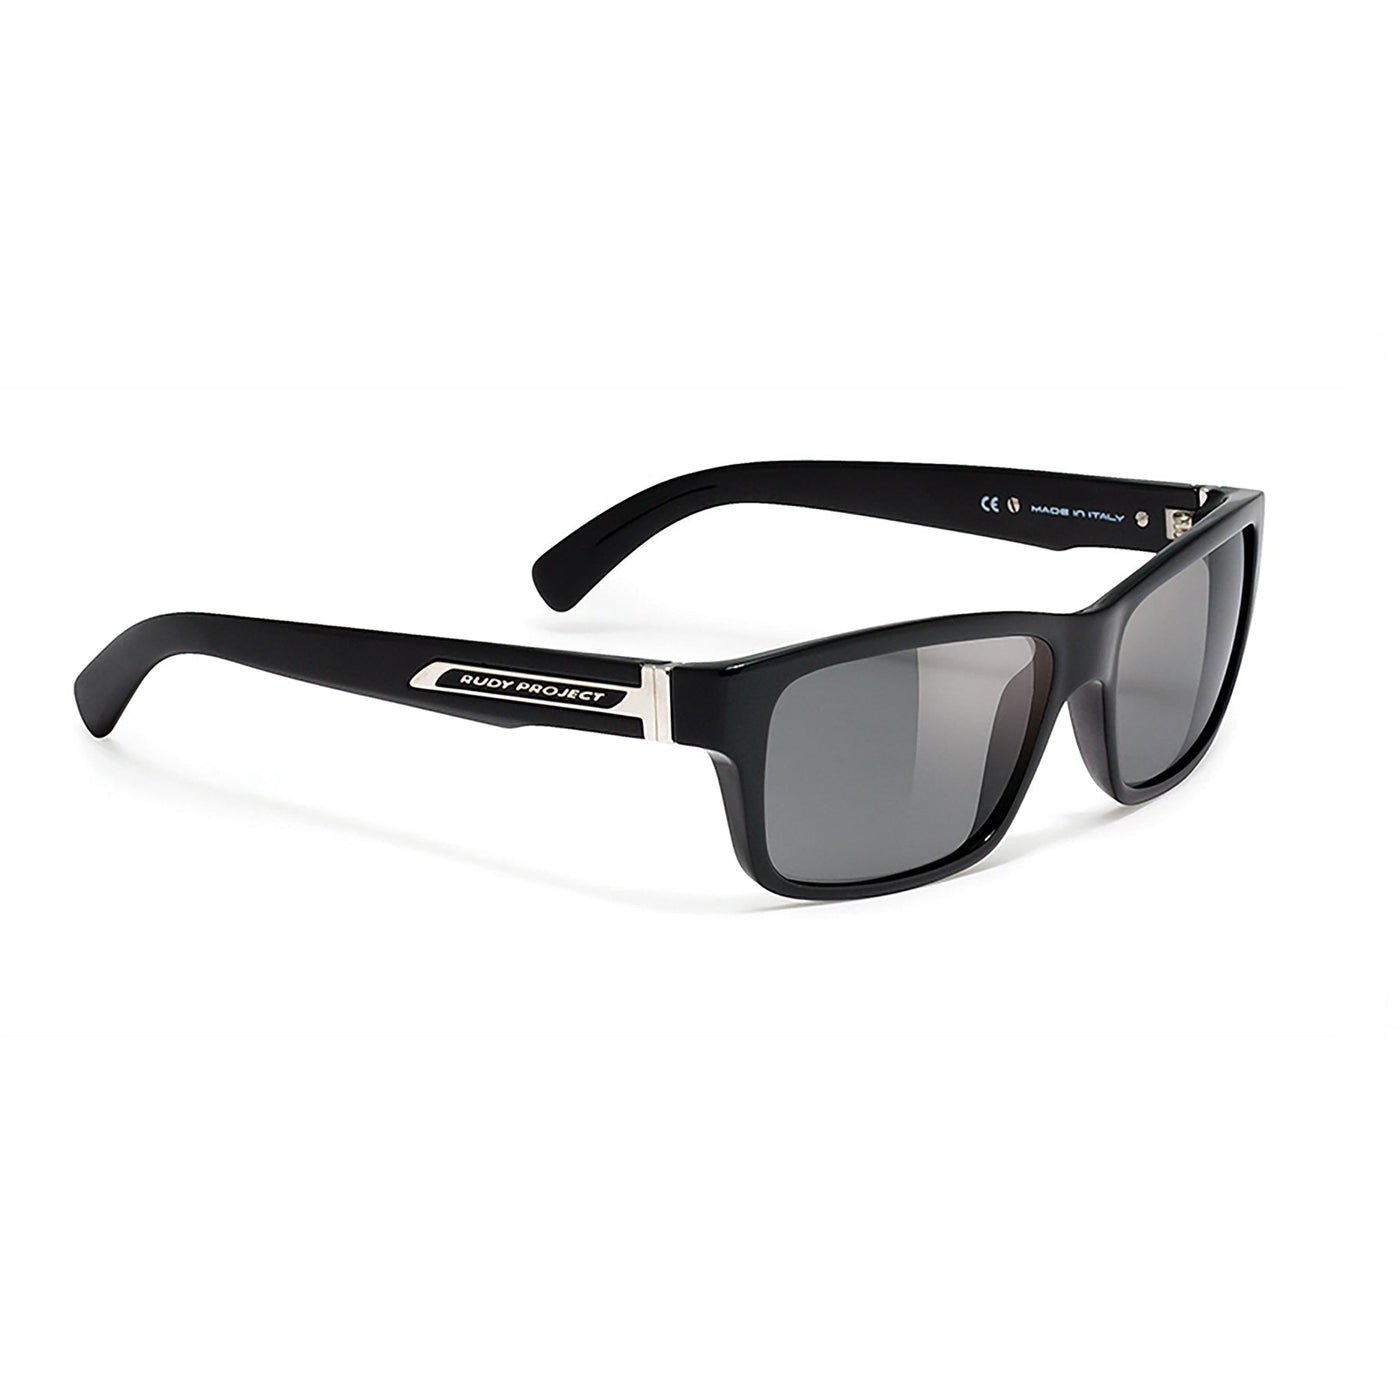 Rudy Project Ultimatum wayfarer lifestyle polarized sunglasses made in Italy for over 35 years. 